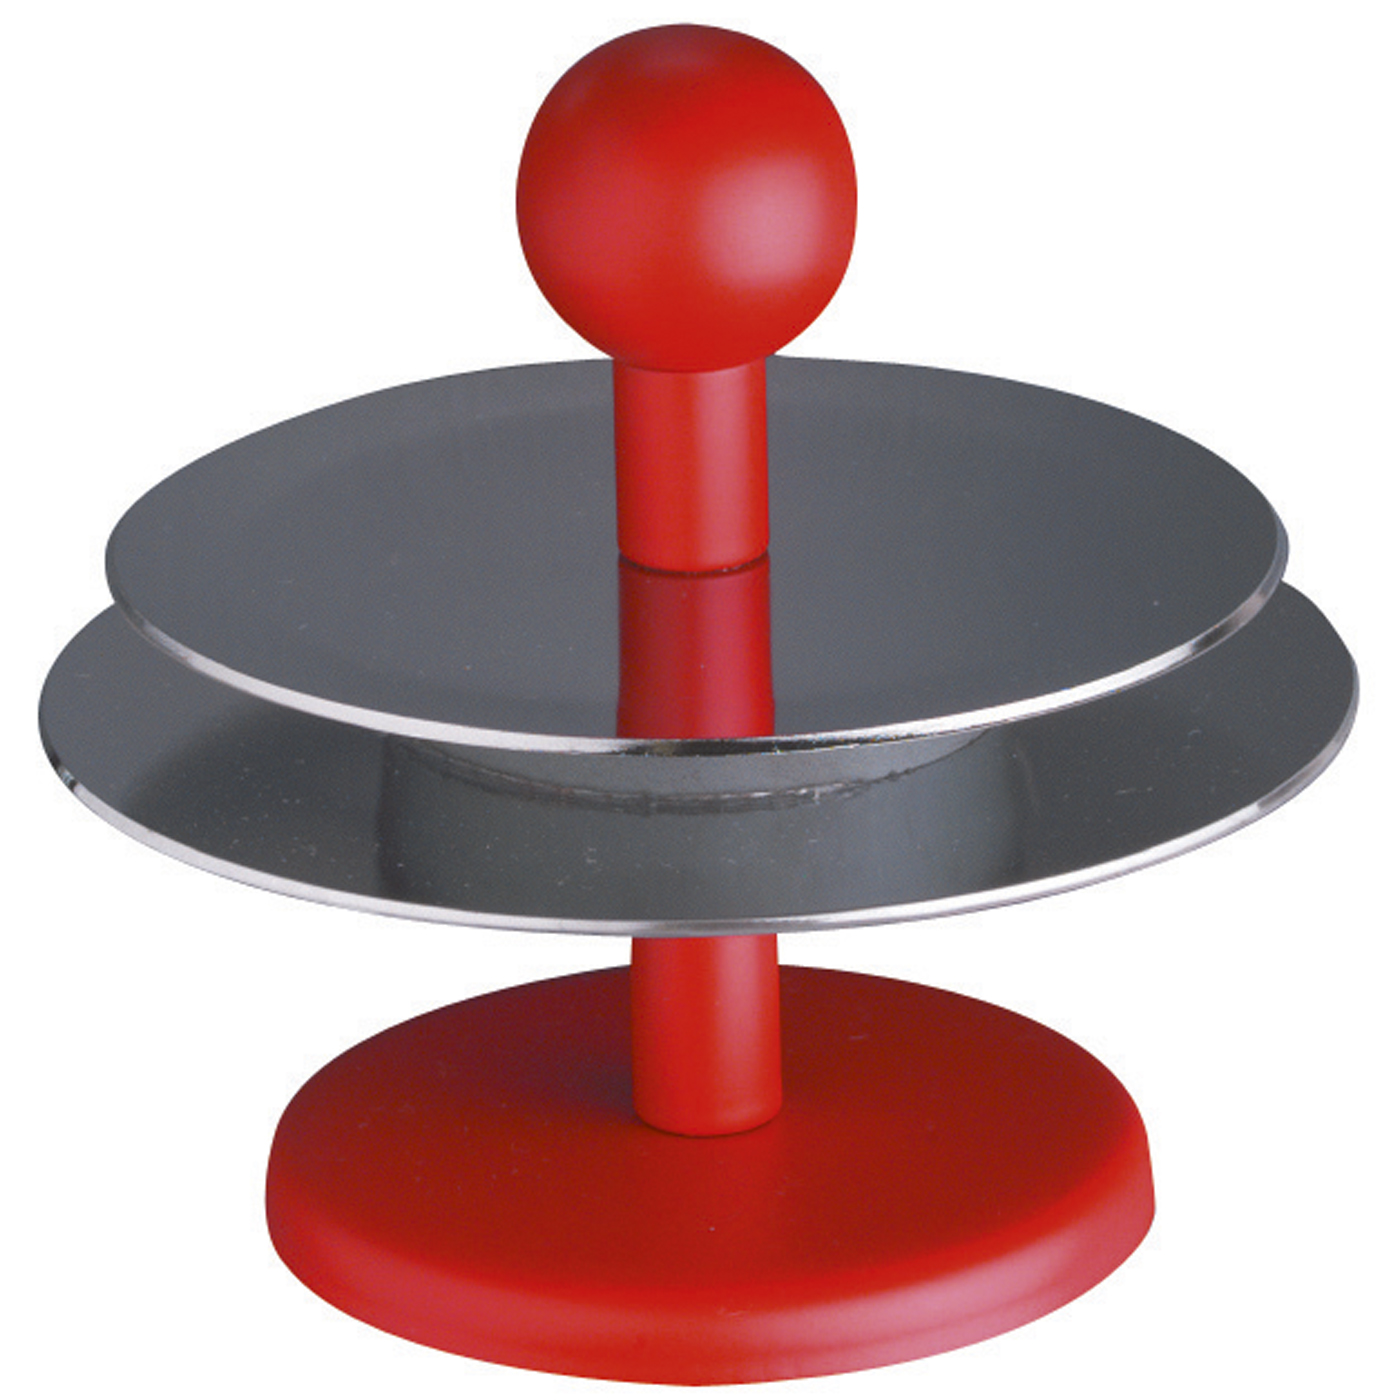 FINO Magnetic Stand, Red - 1 piece